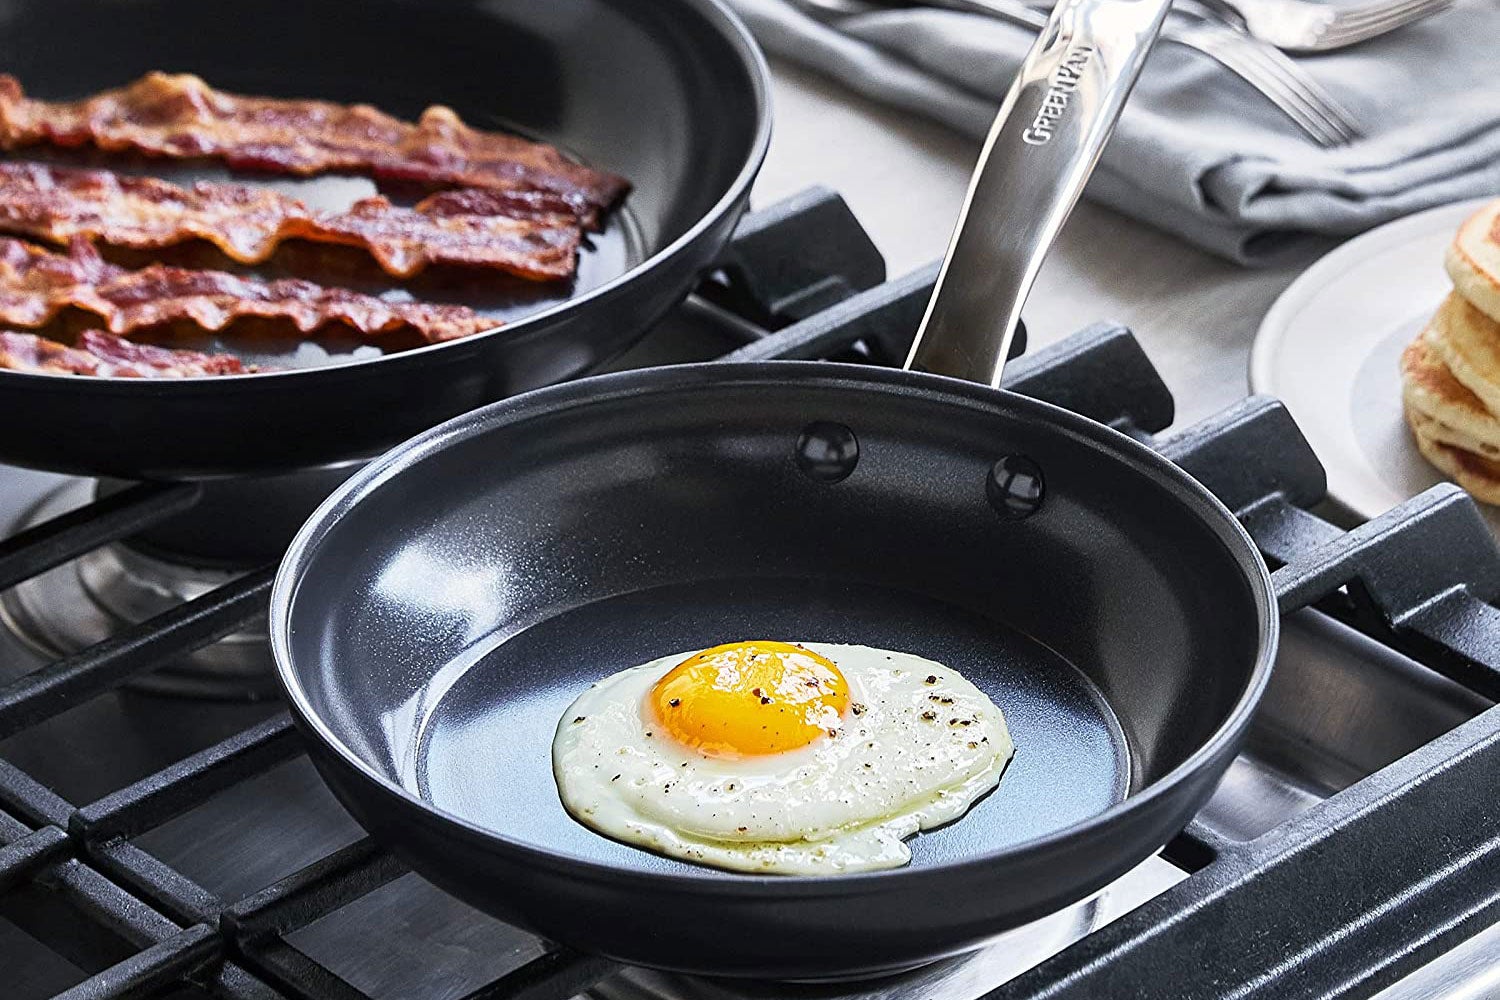 Prime Day HexClad deal: Save $698 on a non-stick cookware set